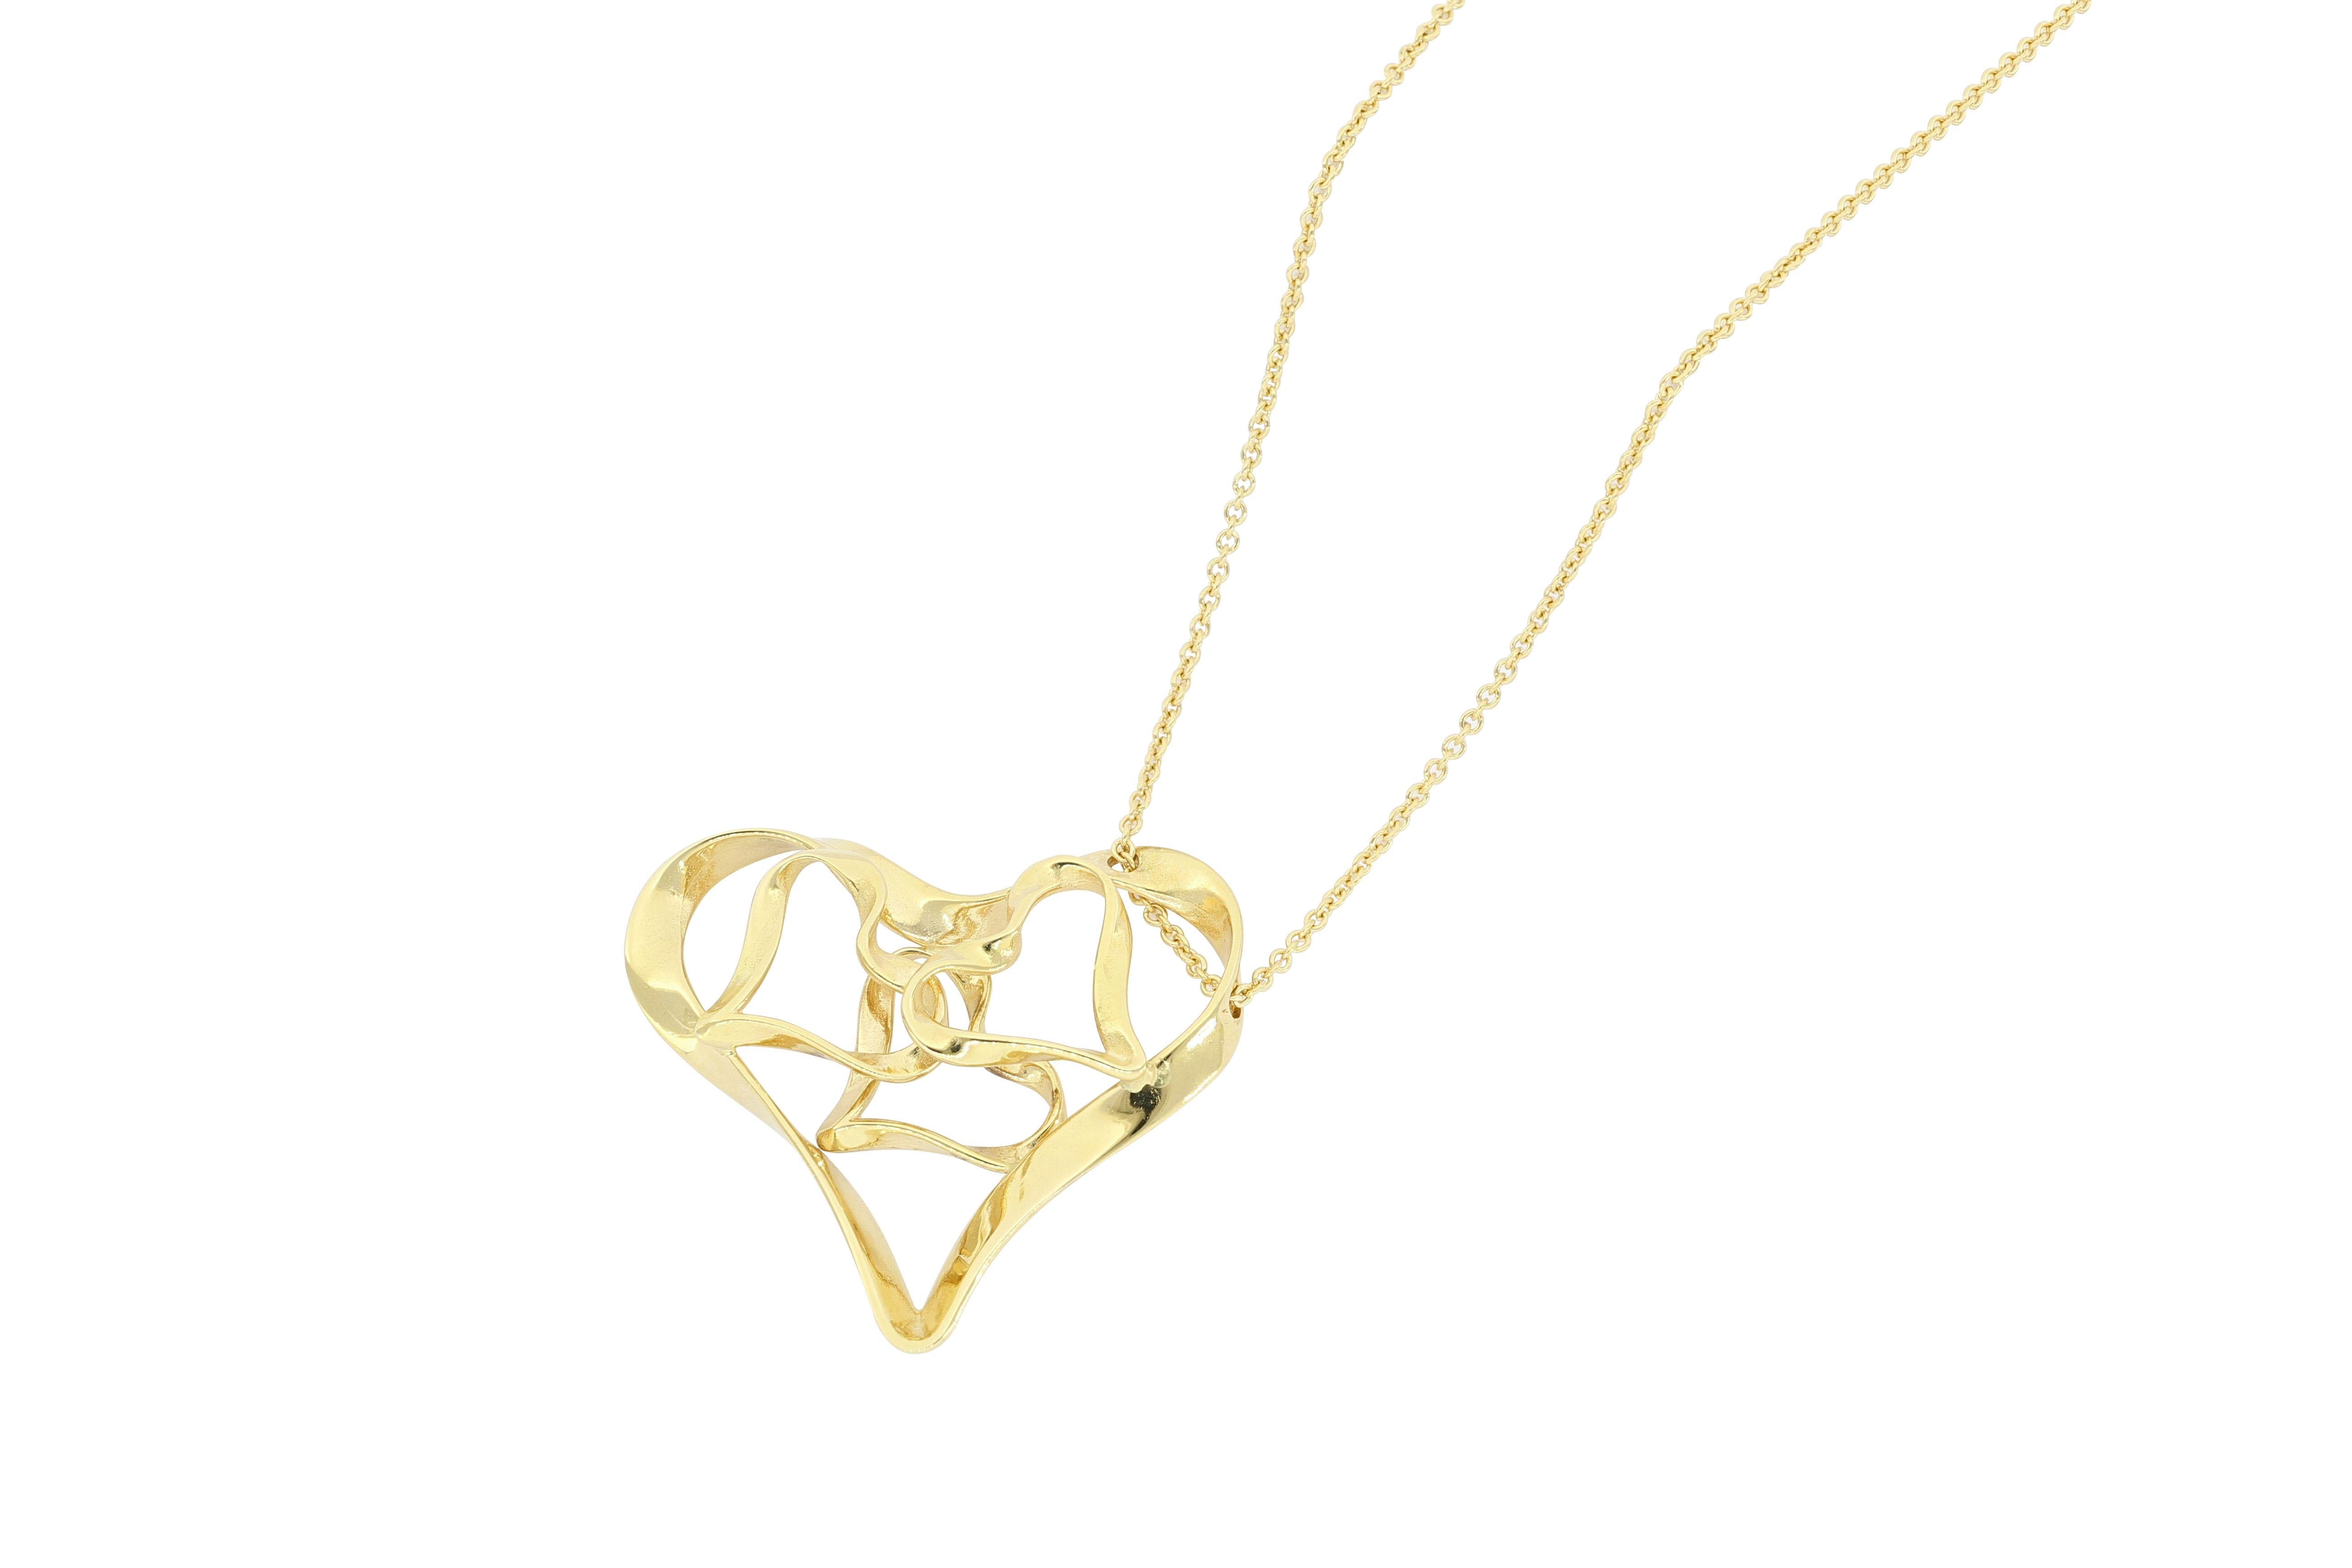 Italian 18K Gold Abstract Heart Shape Pendant Necklace In New Condition For Sale In Macau, MO